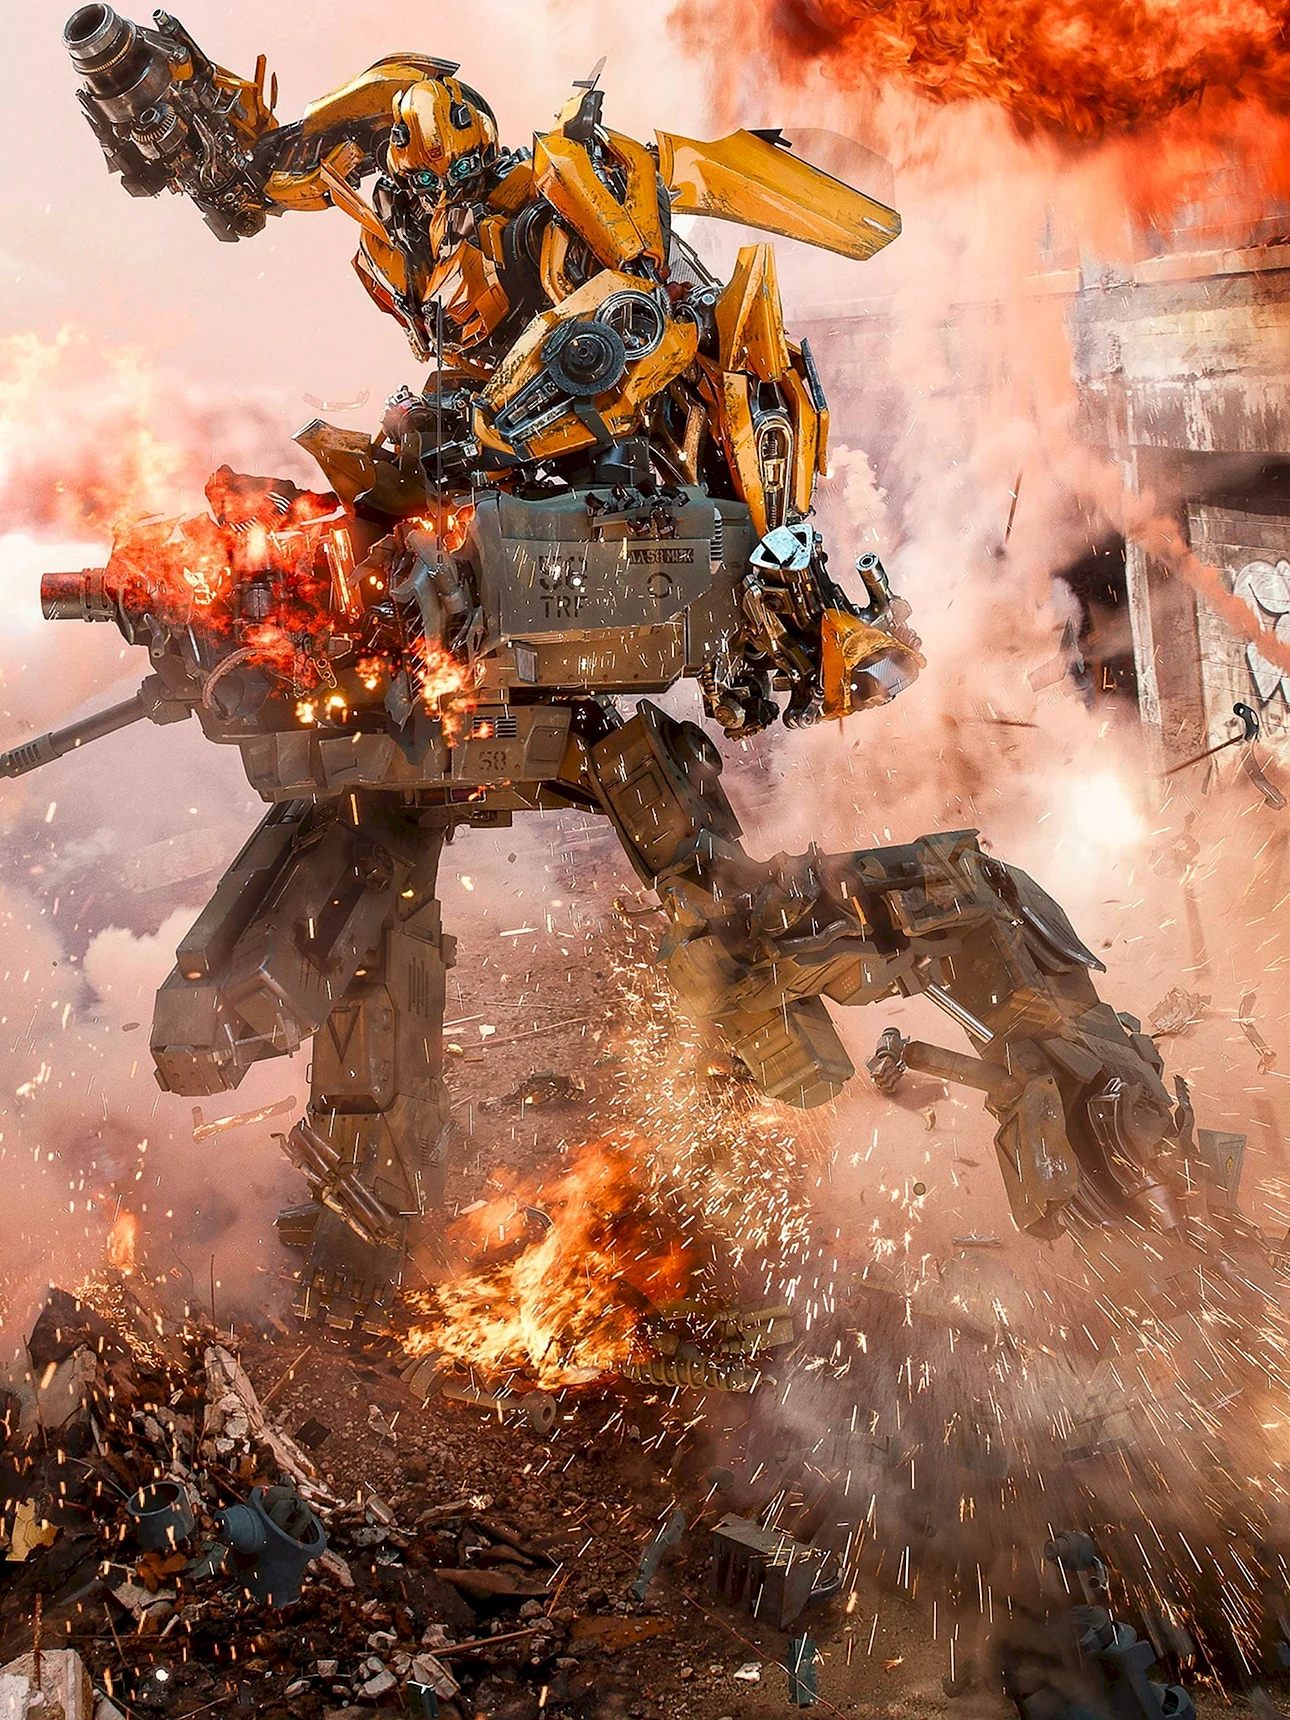 Bumblebee Transformers Wallpaper For iPhone